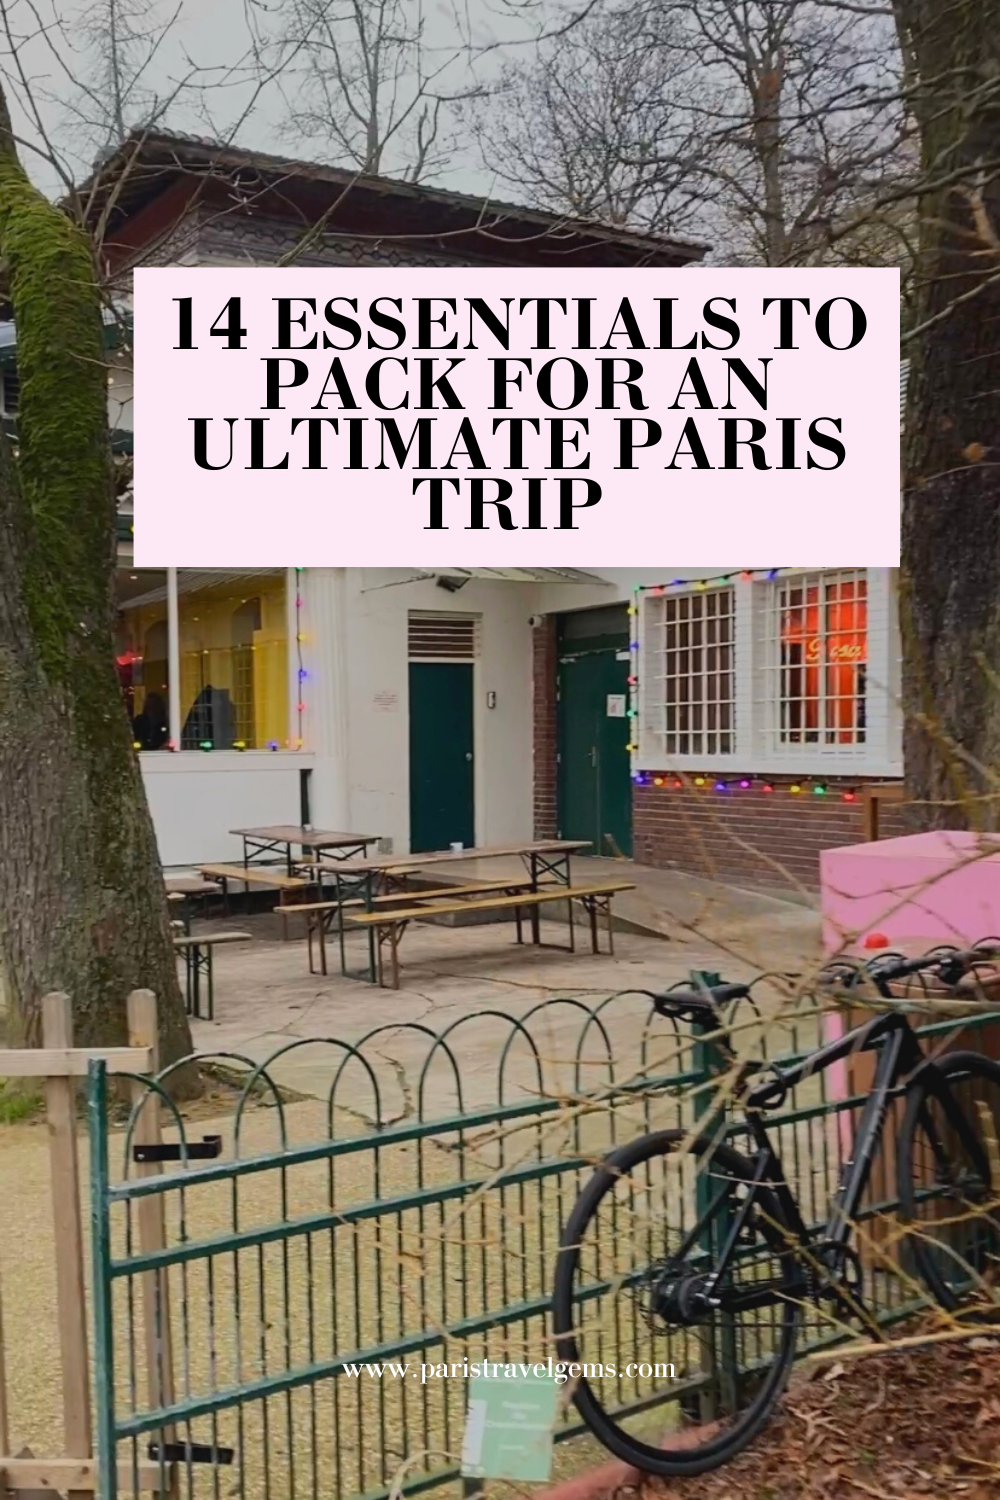 14 Essentials to Pack For An Ultimate Paris Trip